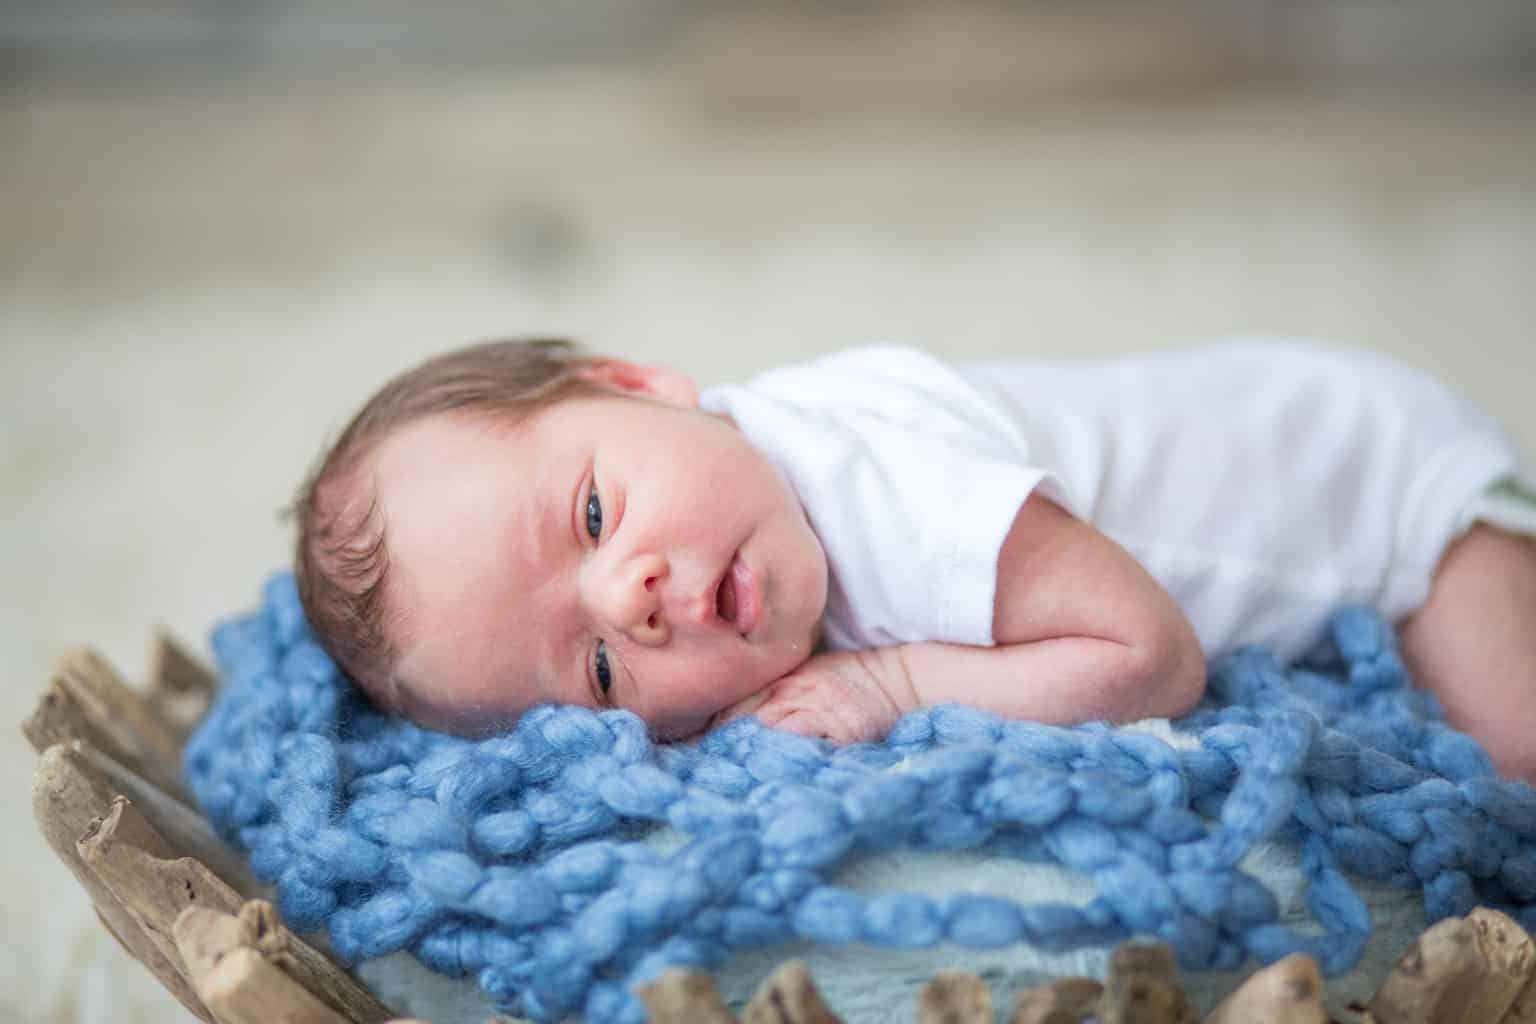 Baby boy in basket with blue knit blanket.